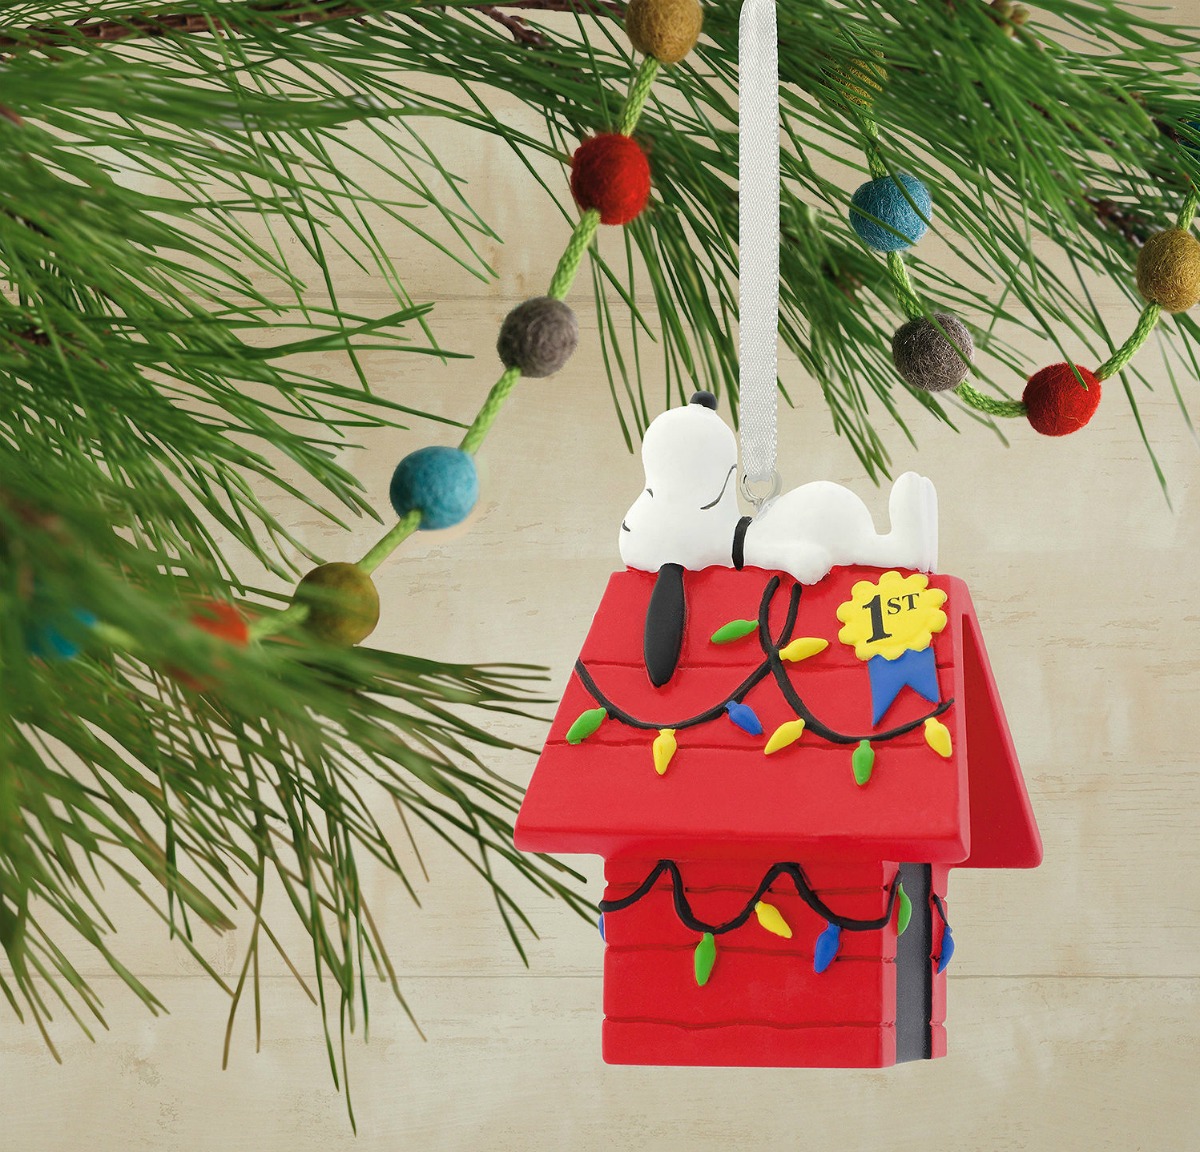 Peanuts Snoopy laying on dog house ornament hanging on tree